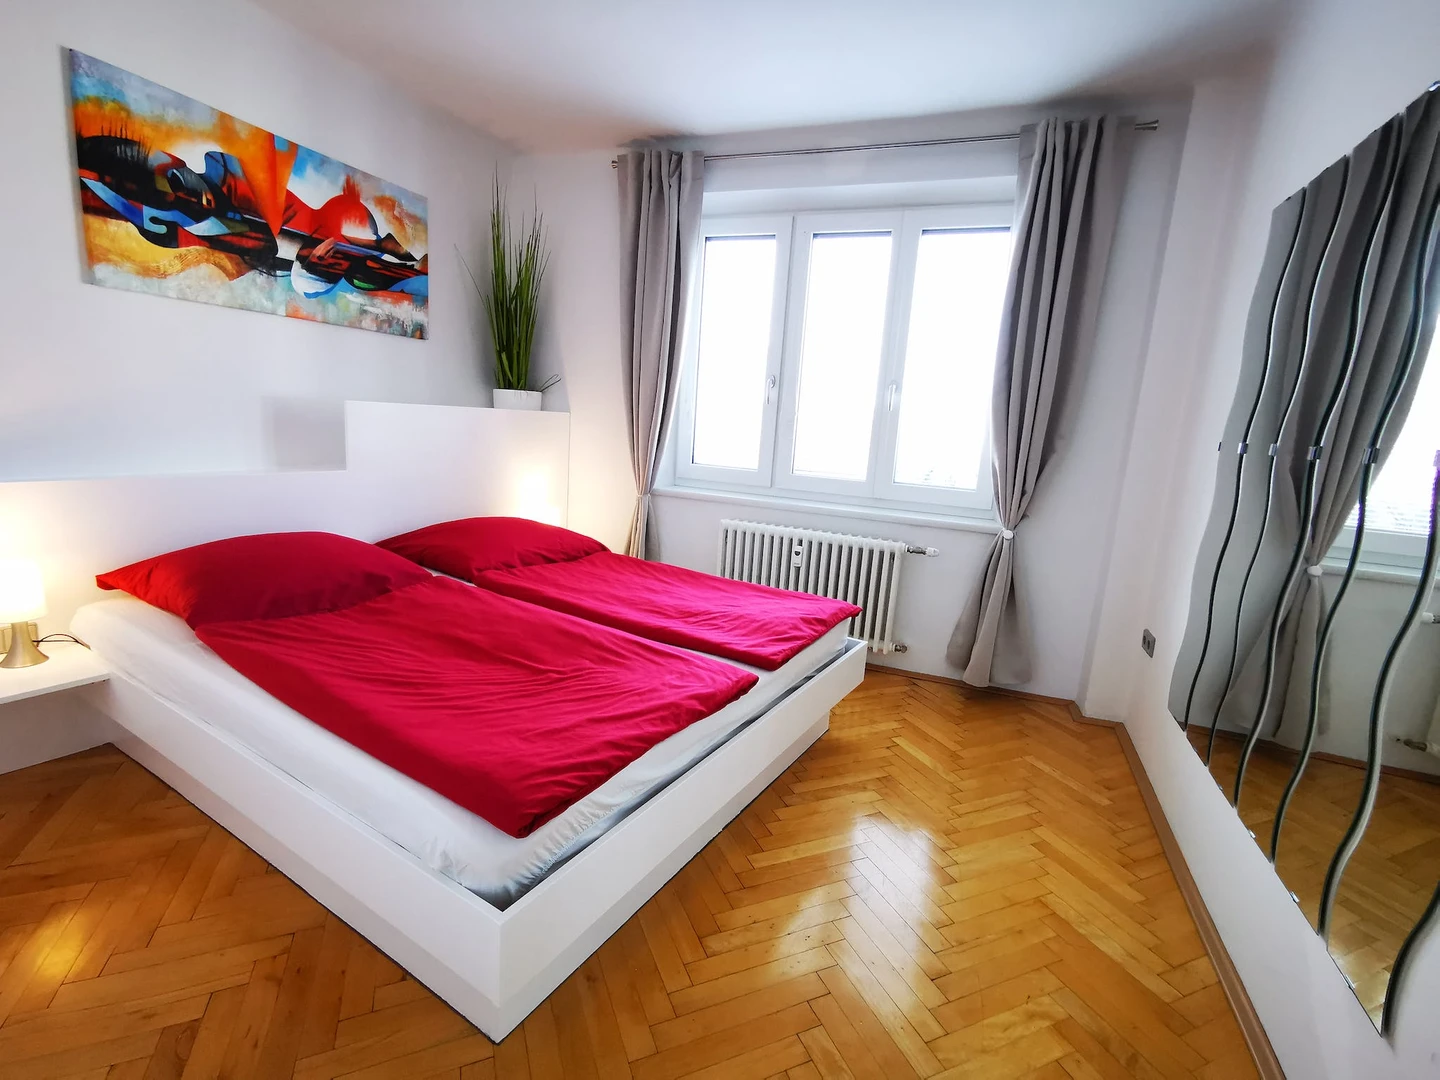 Accommodation in the centre of Klagenfurt